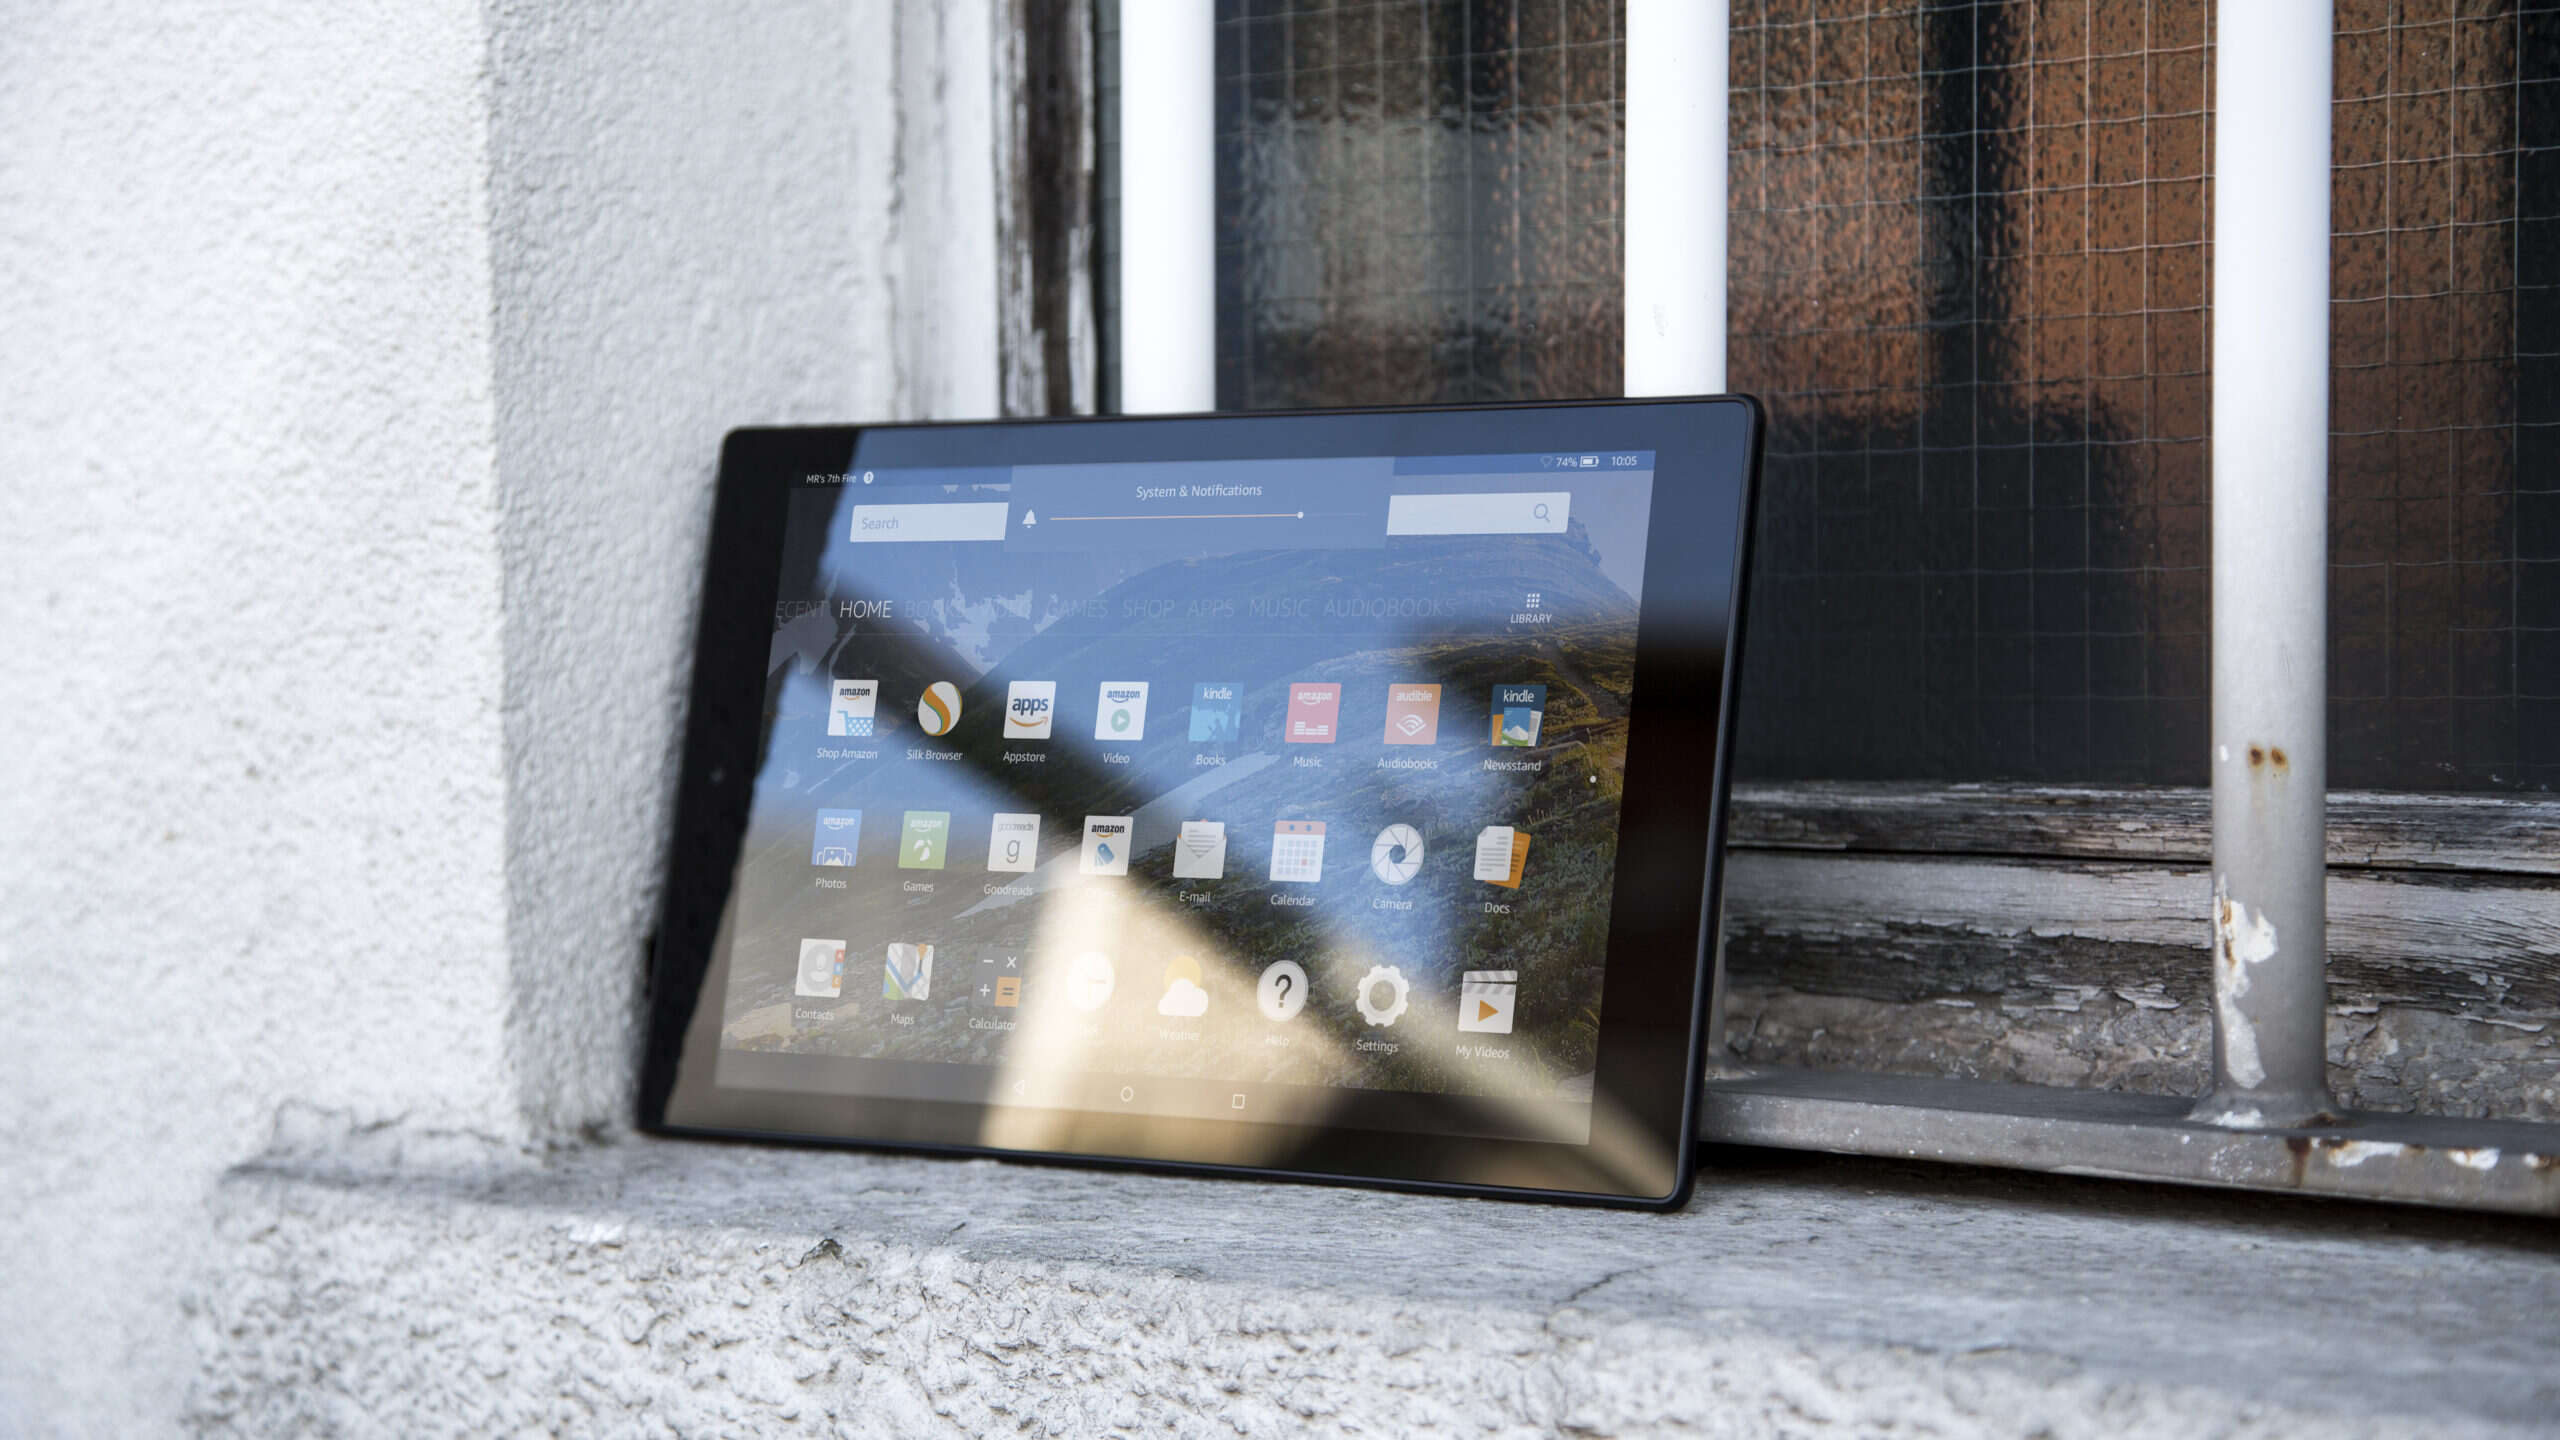 How To Find Hidden Apps On Amazon Fire Tablet